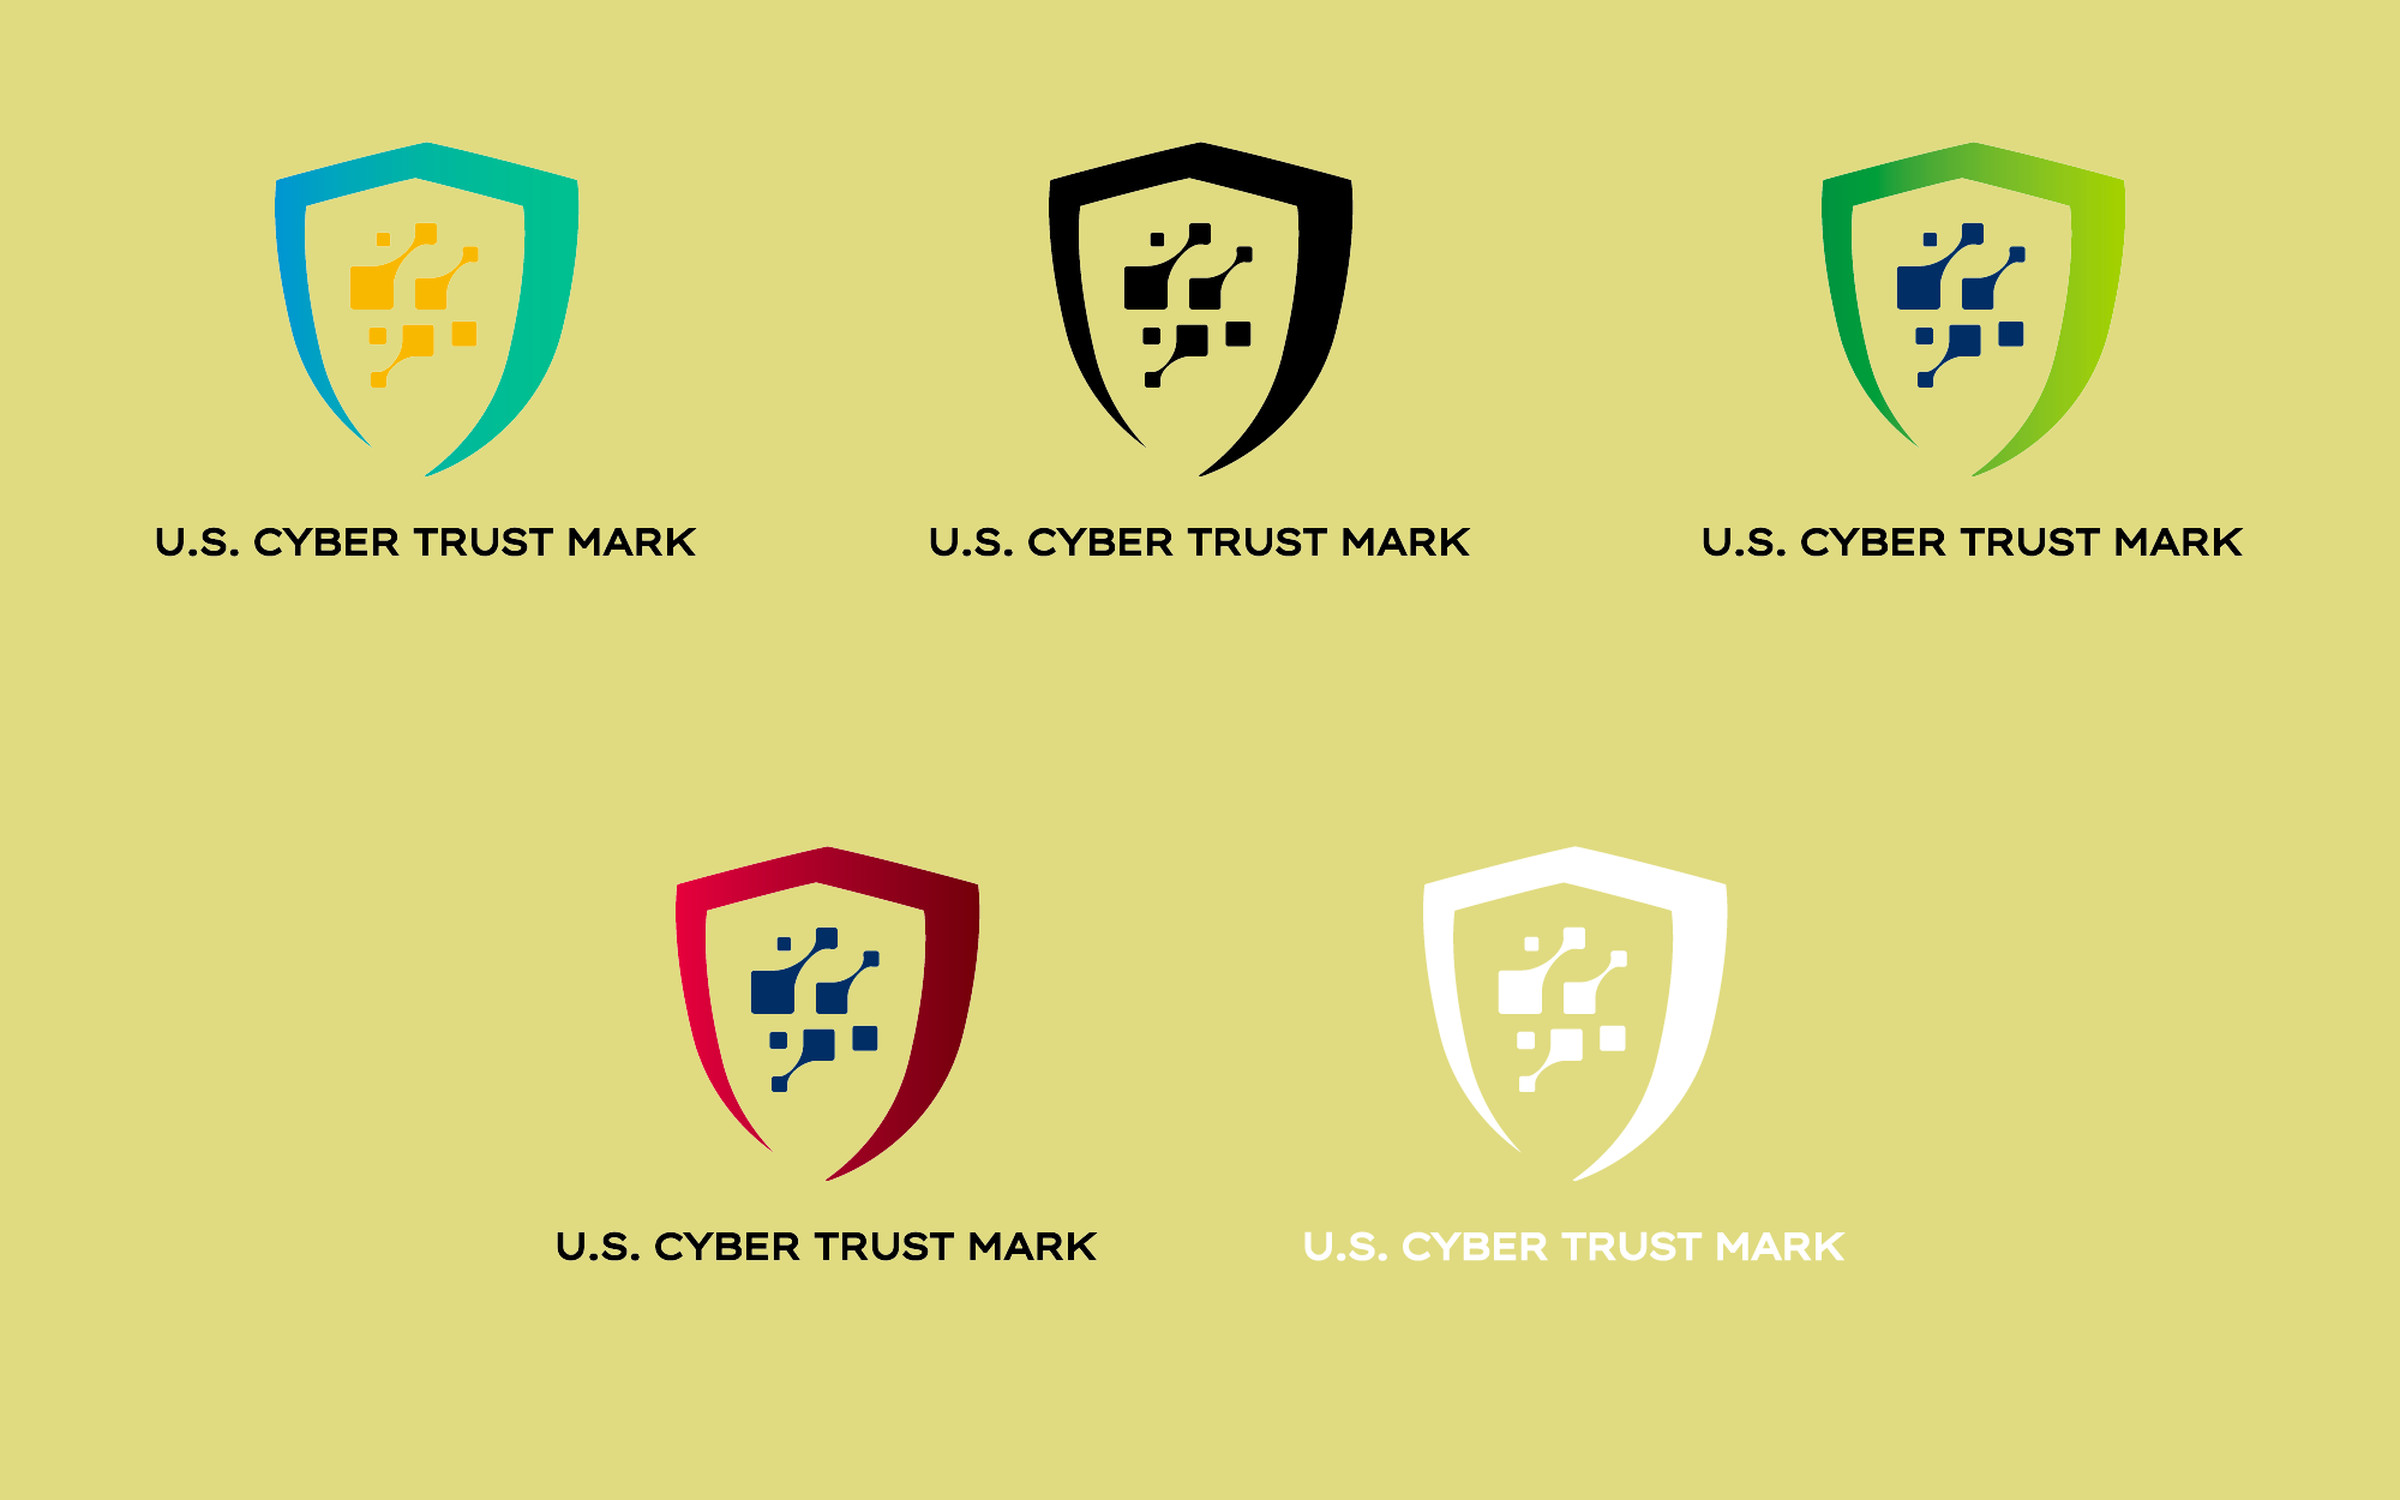 Five variants of the Cyber Trust Mark, from top left to bottom right: blue to aqua, black, green to light green, light red to dark red, and white